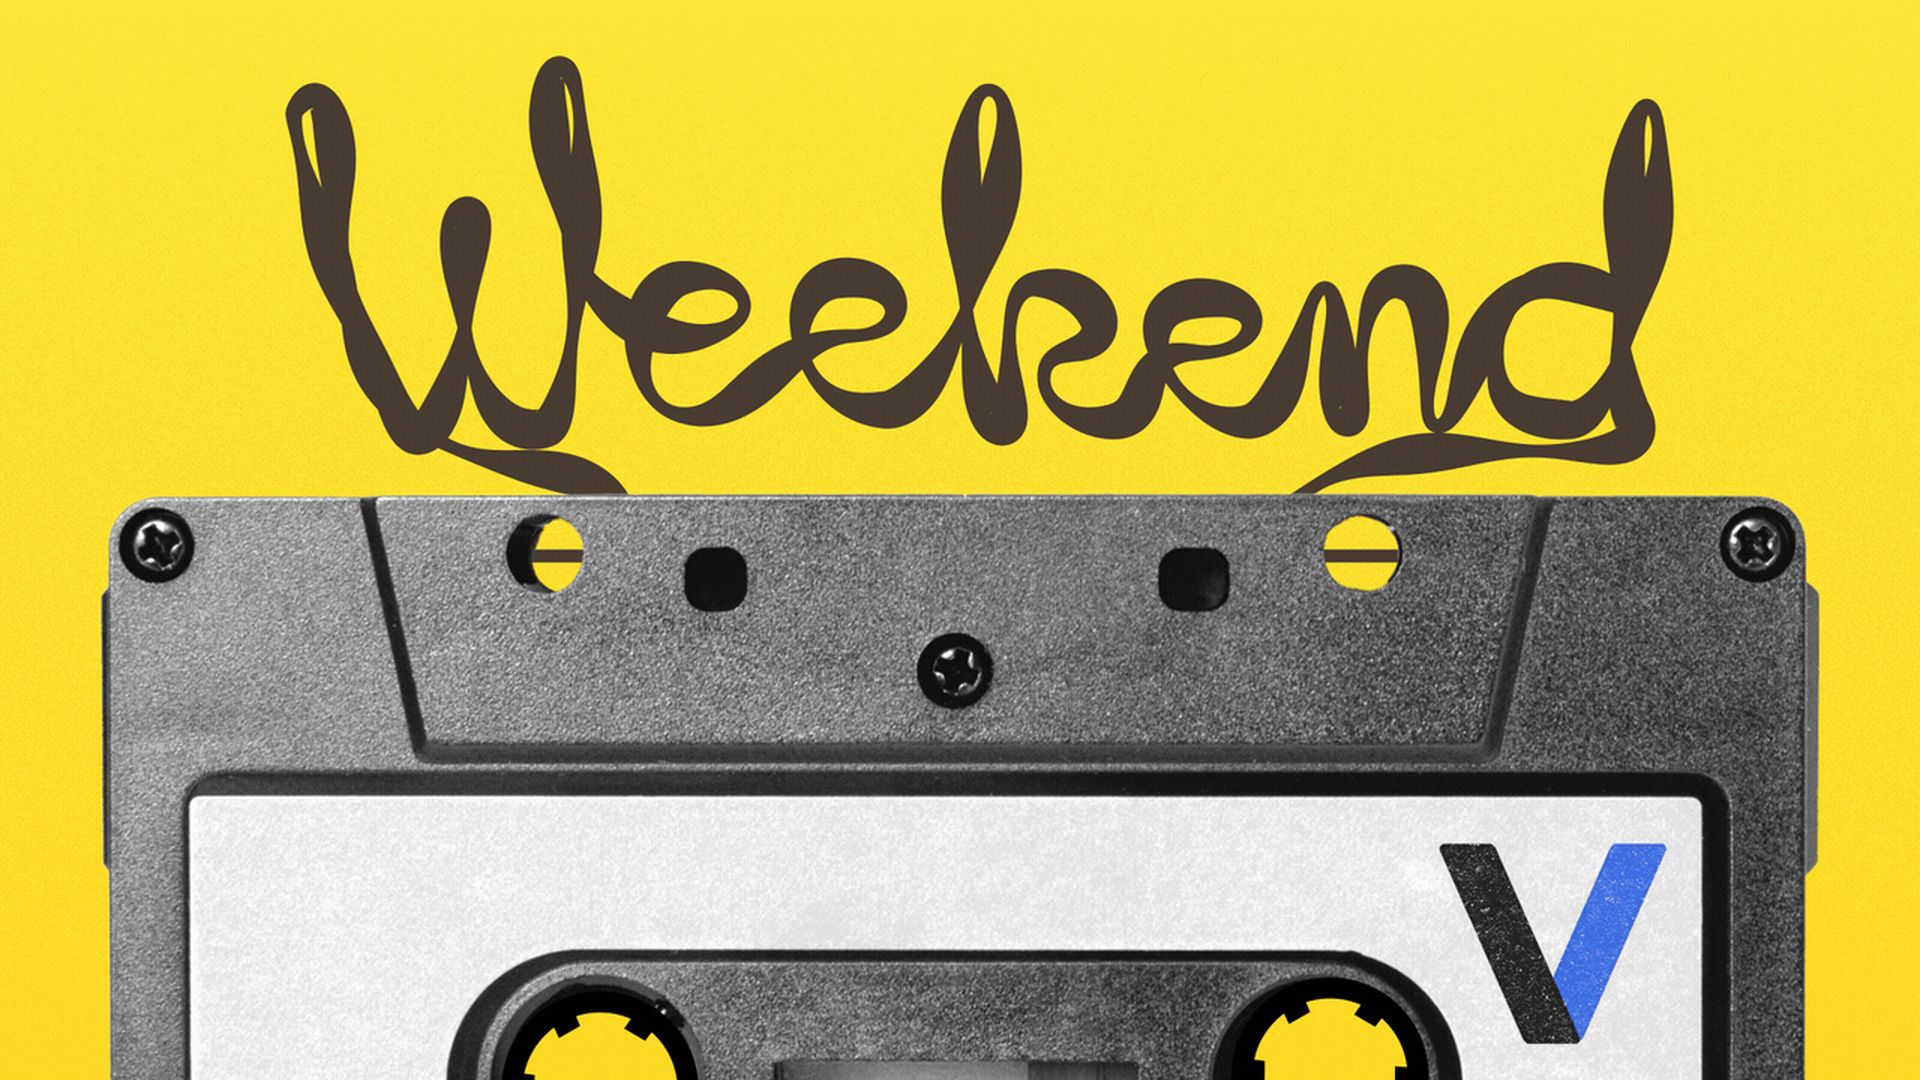 Illustration of a cassette tape with the tape unspooling to spell weekend.